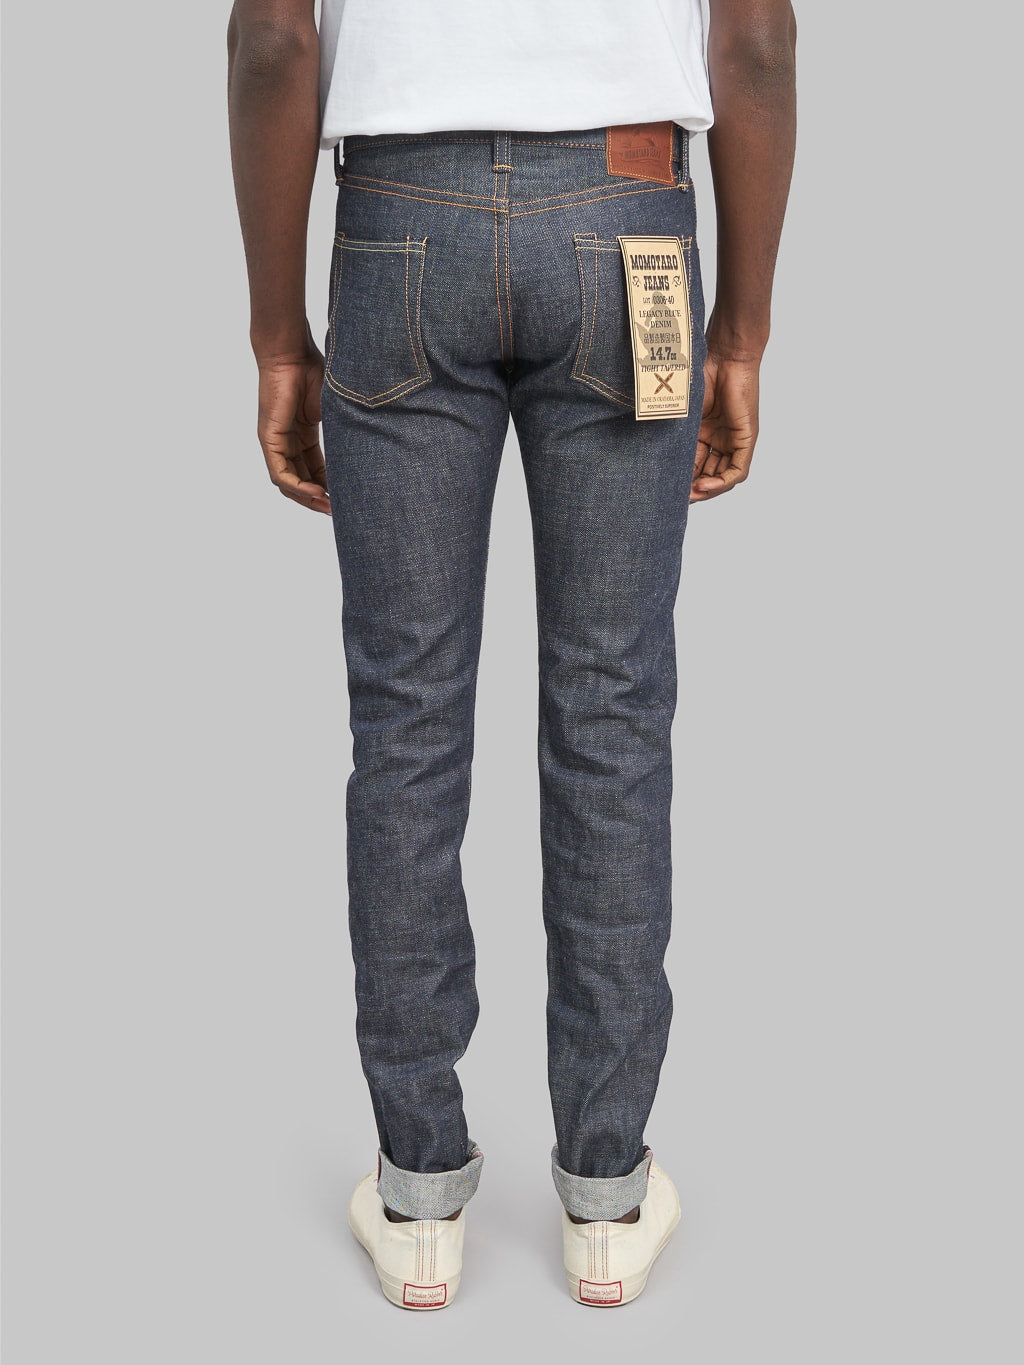 Momotaro 0306 40 Legacy Blue Tight Tapered Jeans back fit